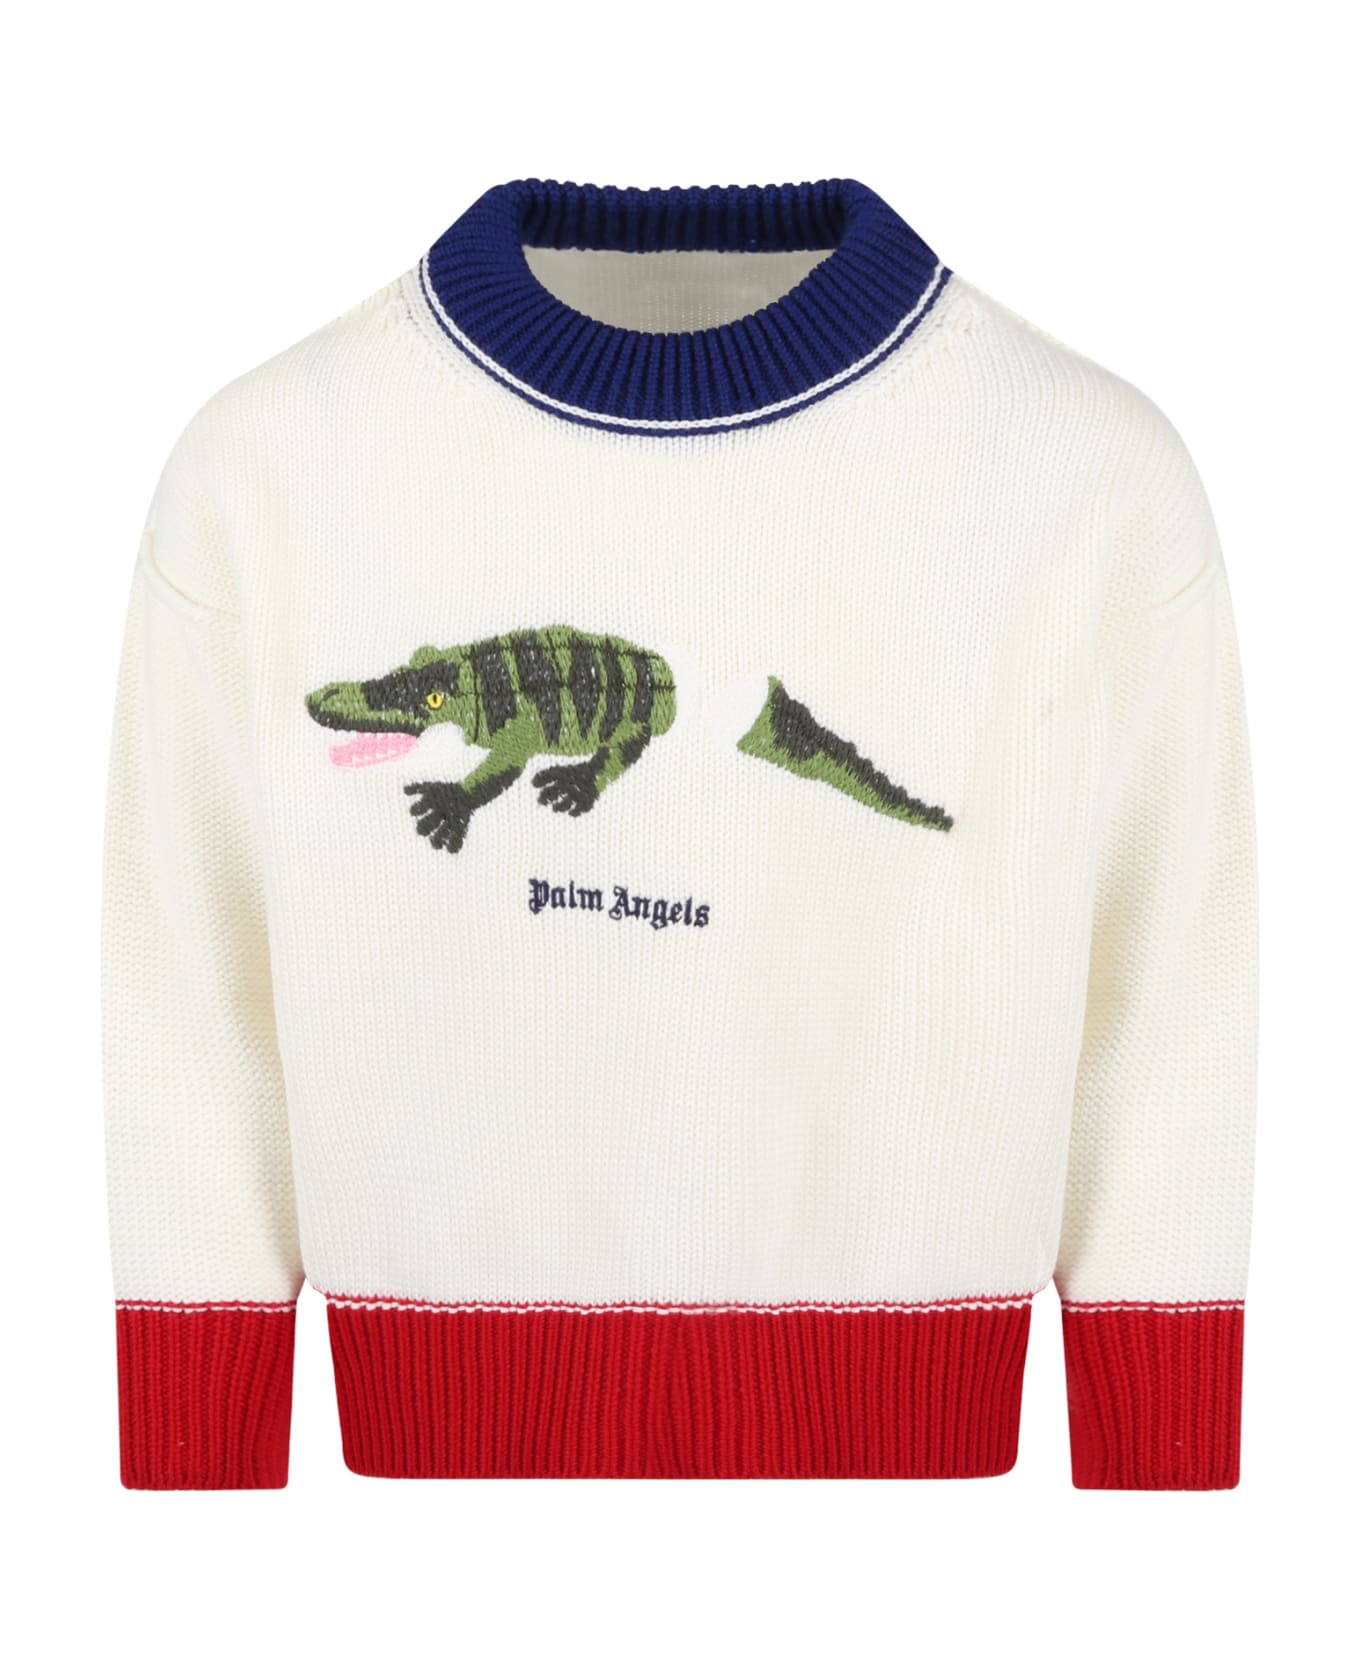 Palm Angels White Sweater For Kids With Crocodile And Logo - White